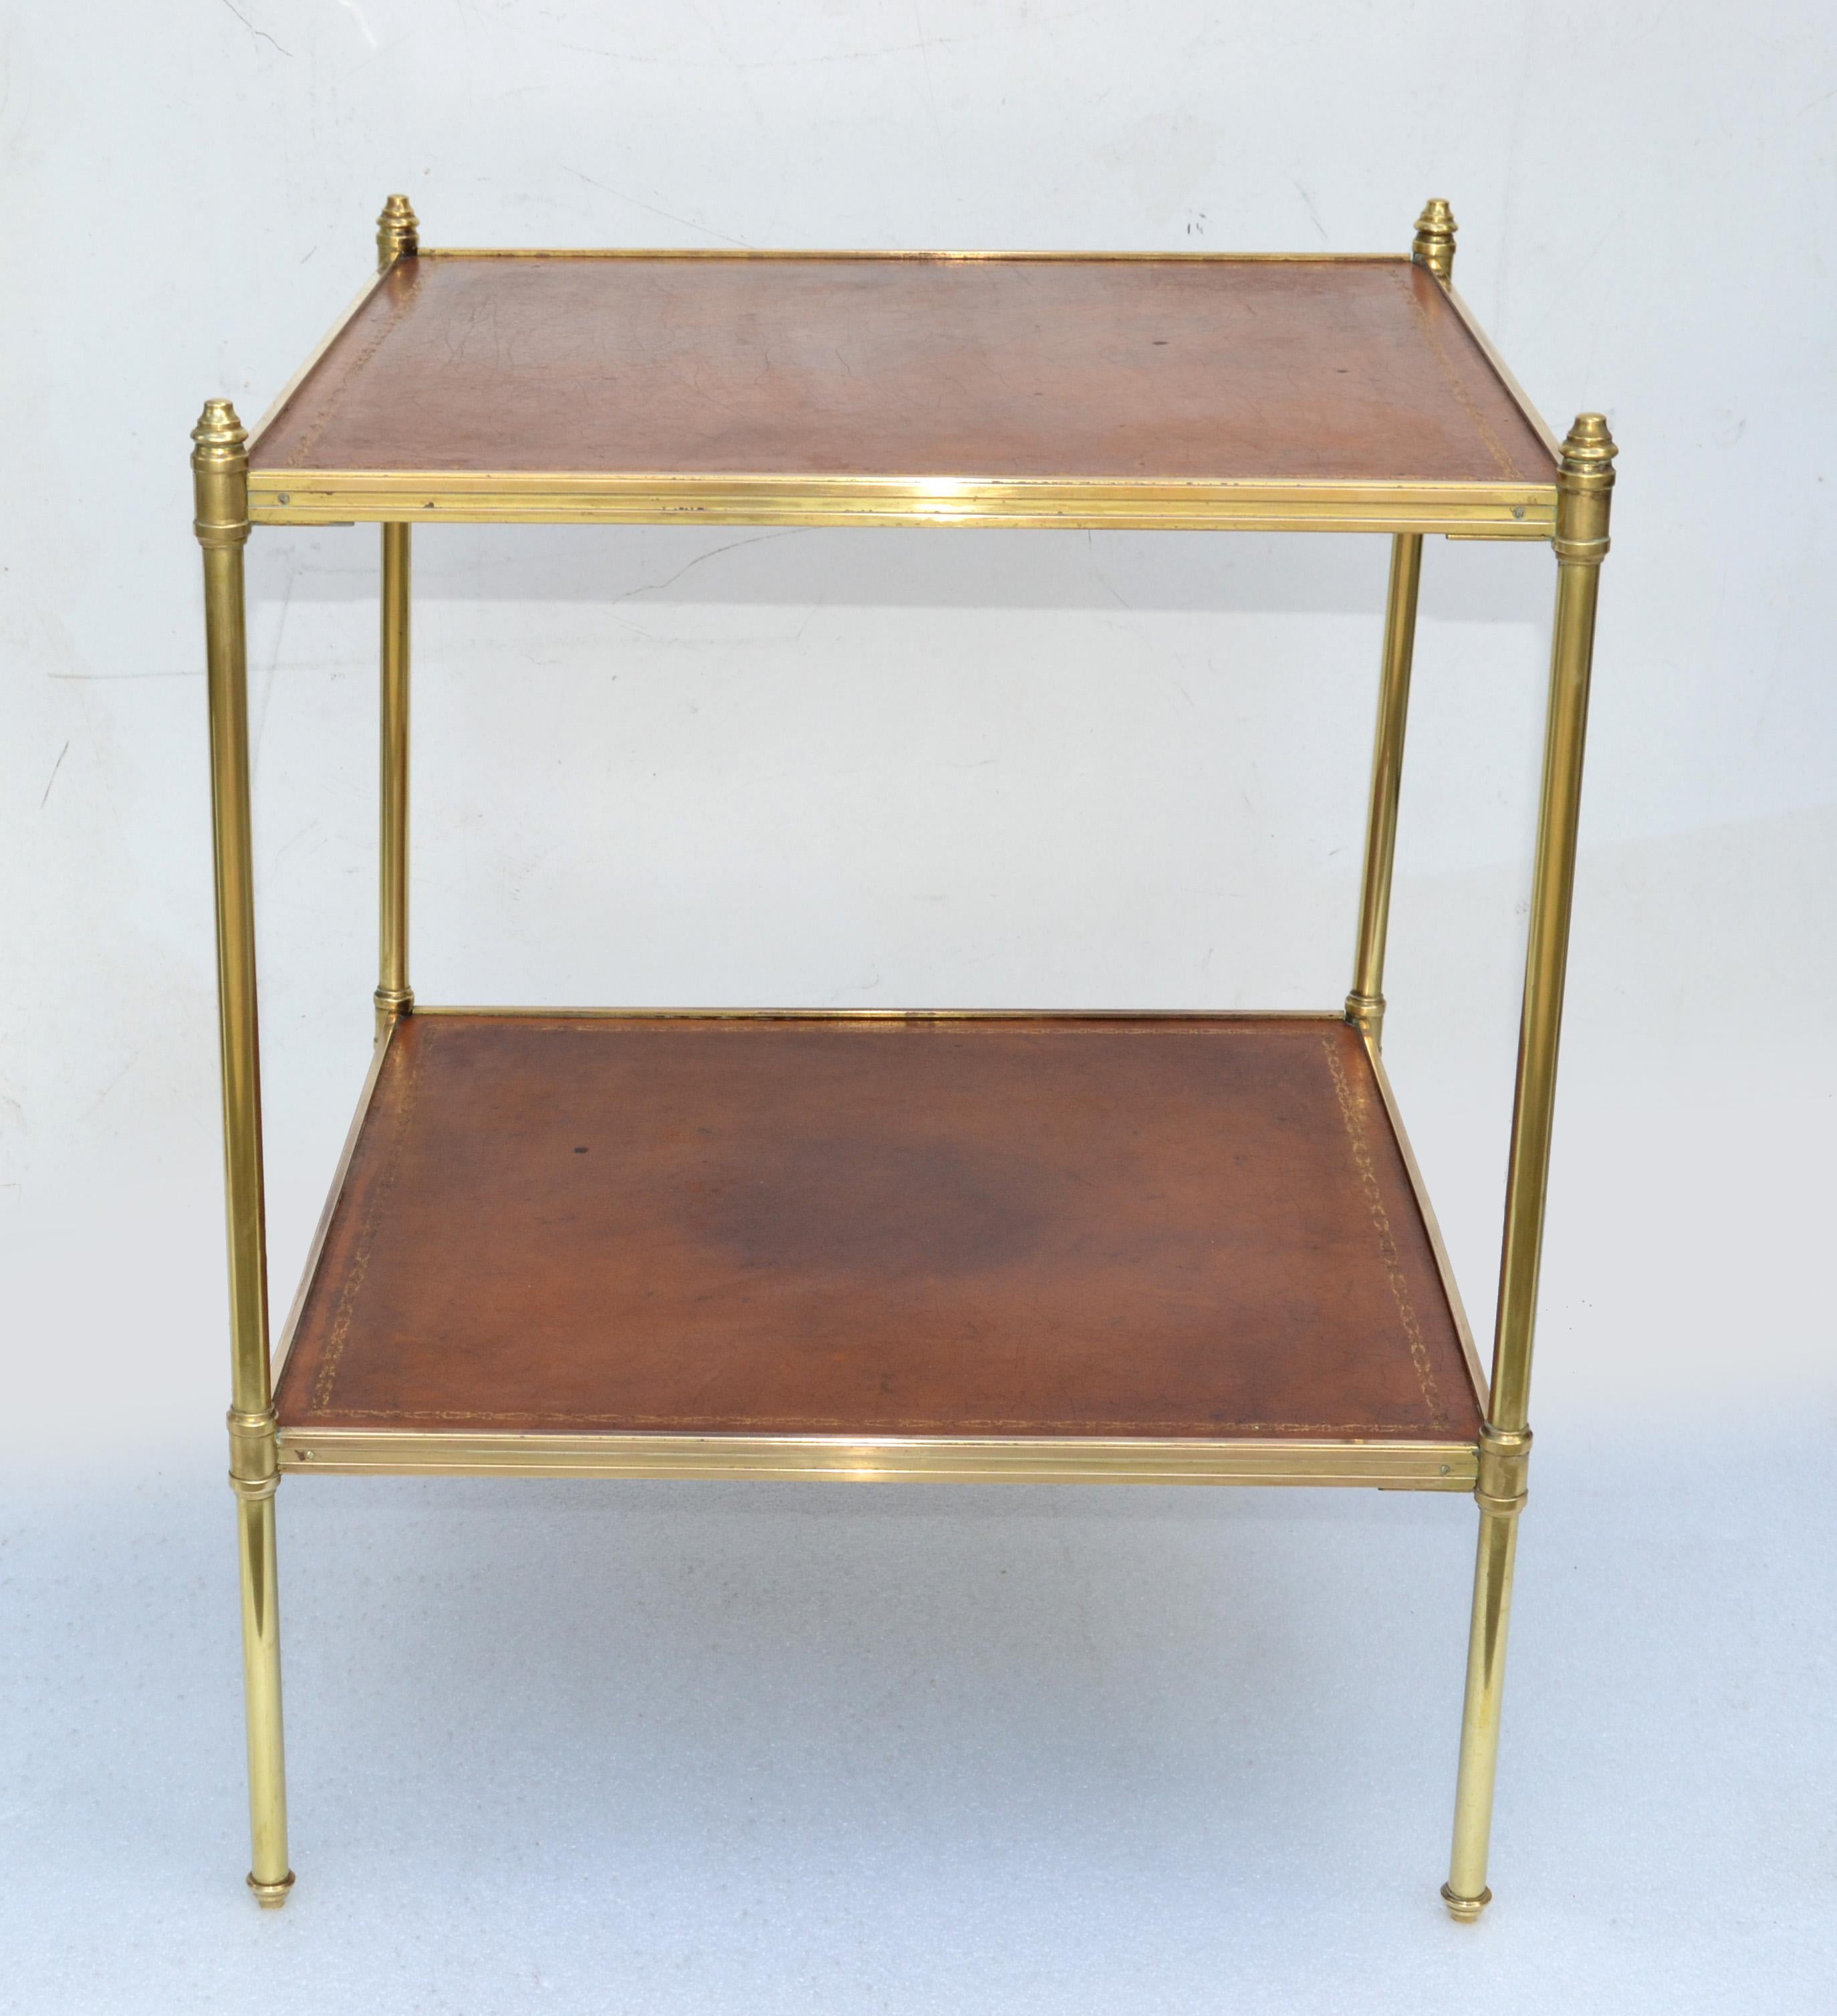 French Neoclassical Maison Jansen brass square side, end, drink table with 2 Tier light Brown Tops.
Raised on 4 polished fine legs and the surface inset gilt tooled & gold border leather tops.
Made in France in the 1950.
Space in between Tiers